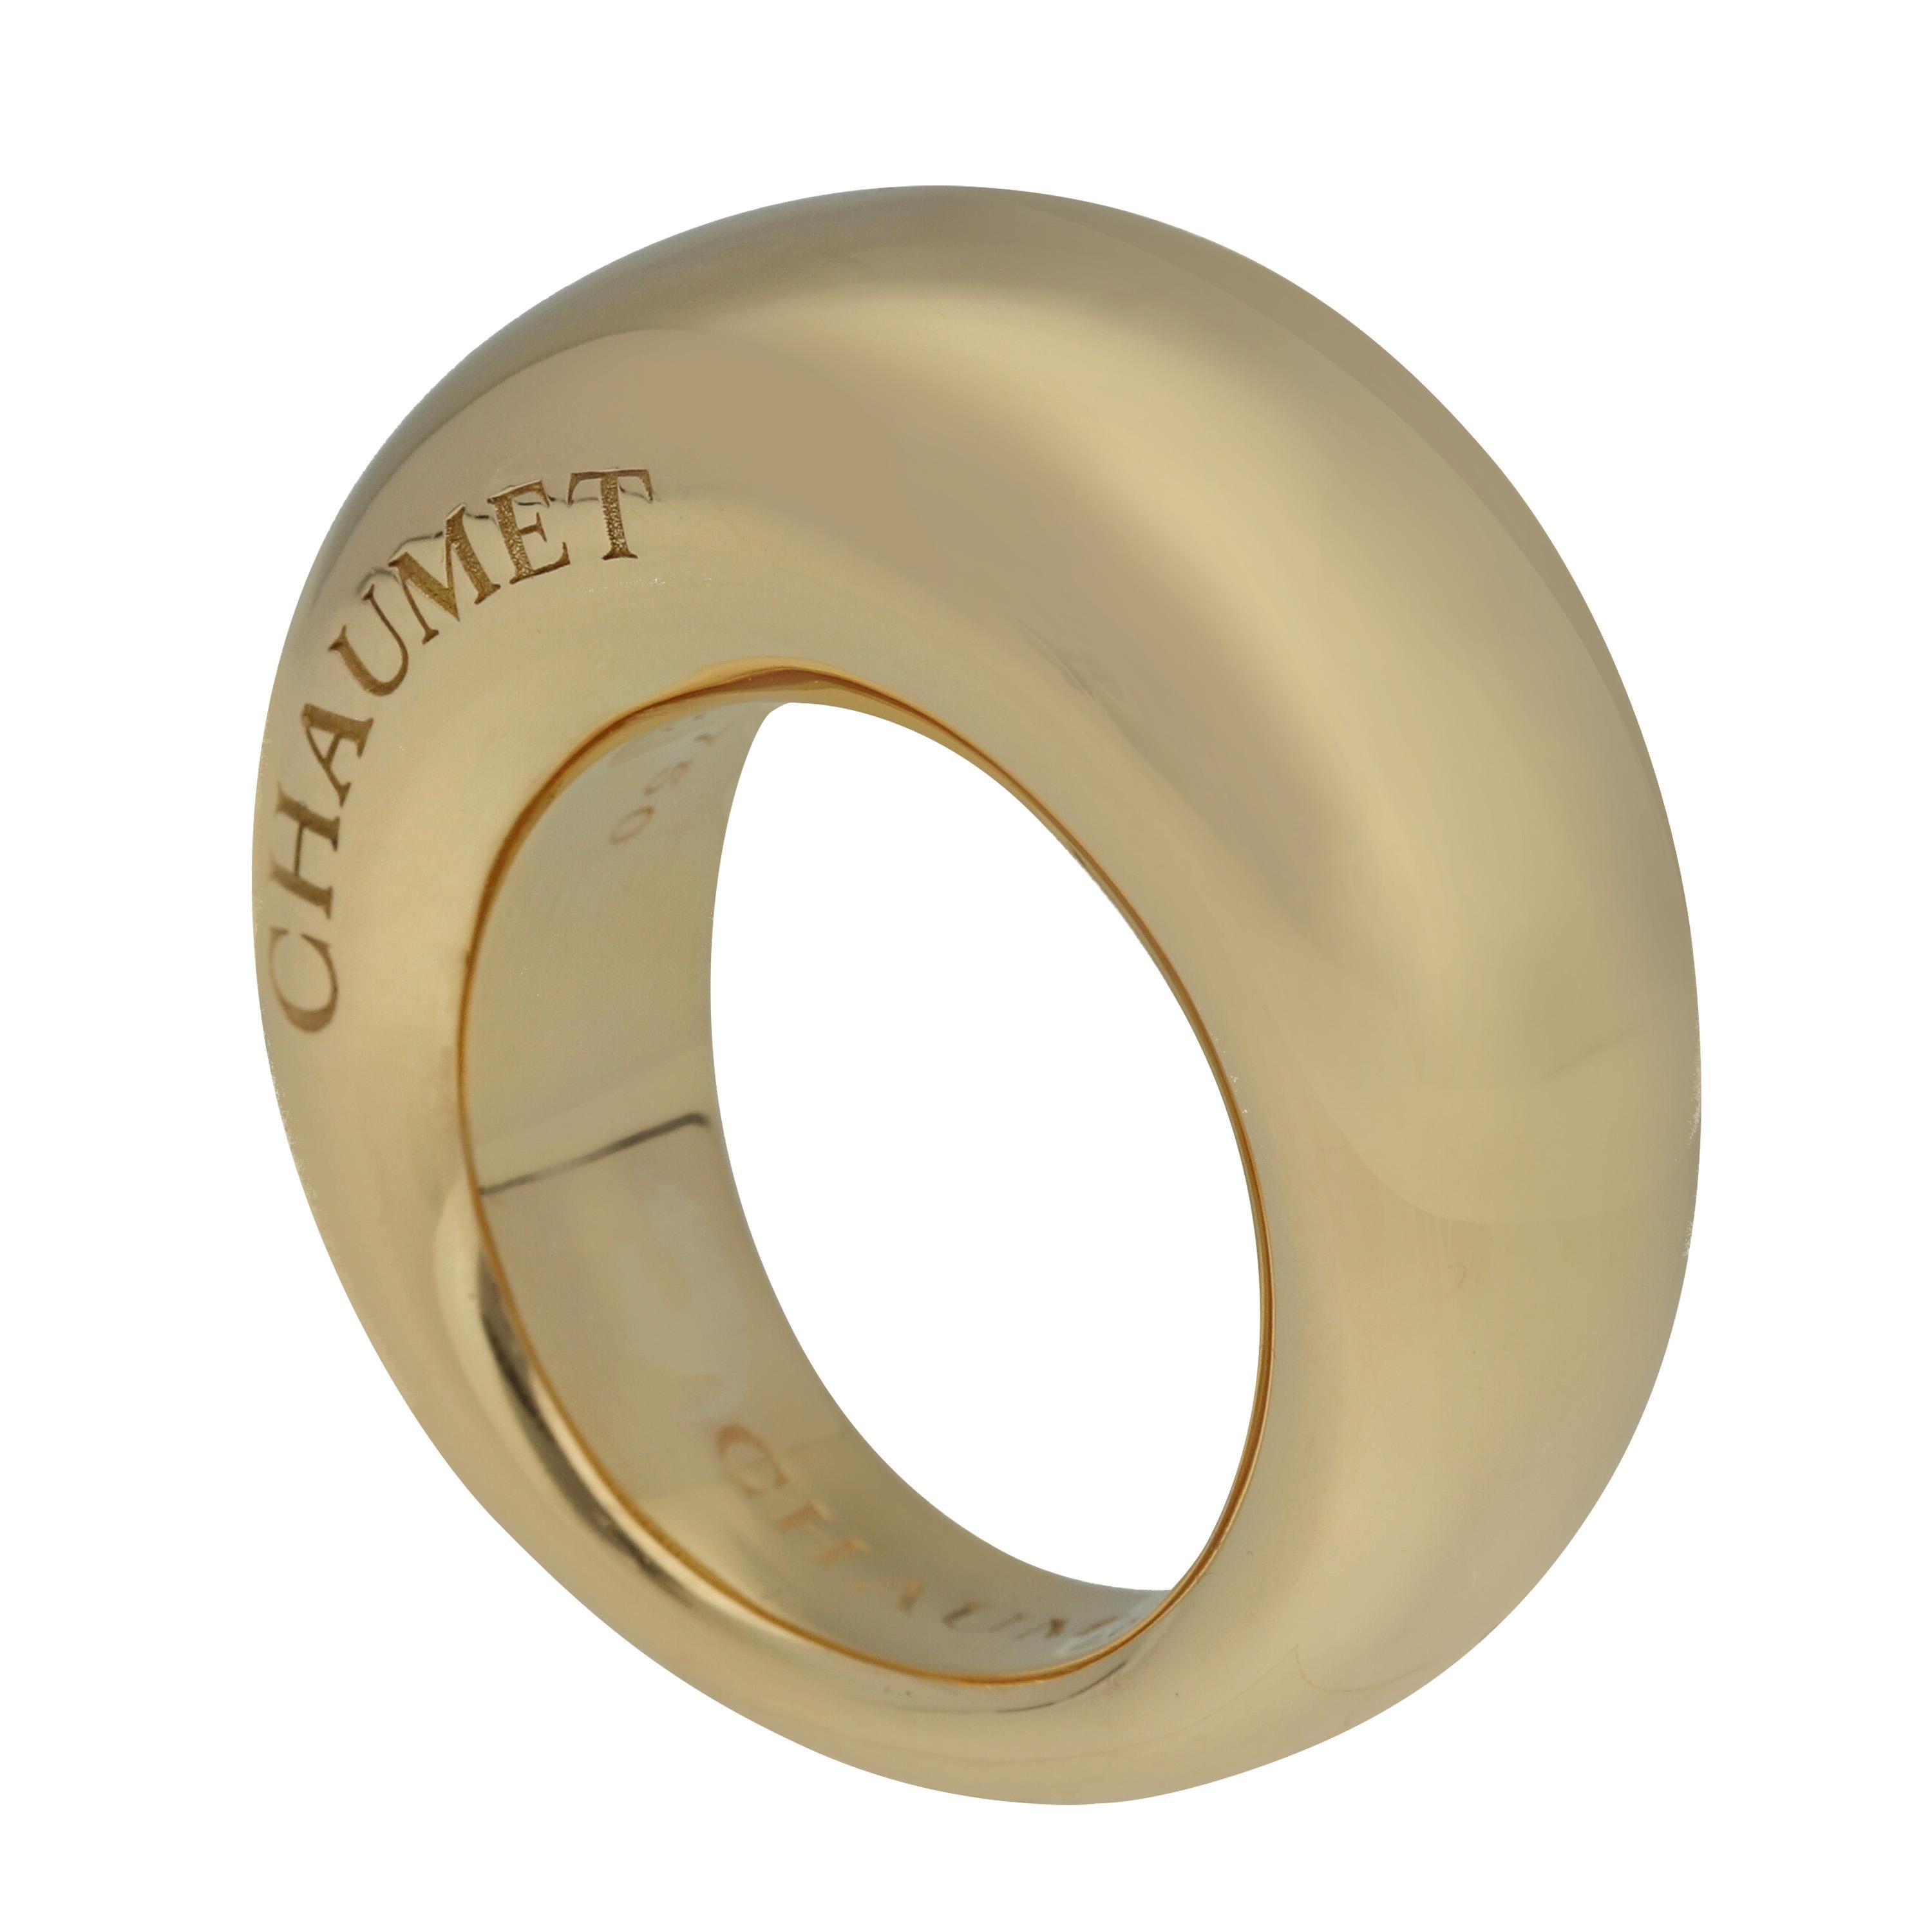 A  very beautiful 750 polished yellow gold Chaumet ring of the collection Anneau, composed of one significant layered dome-shaped bangle. 

Clean lines and a generous roundness are the signature of the Anneau de Chaumet collection. 

This ring is a